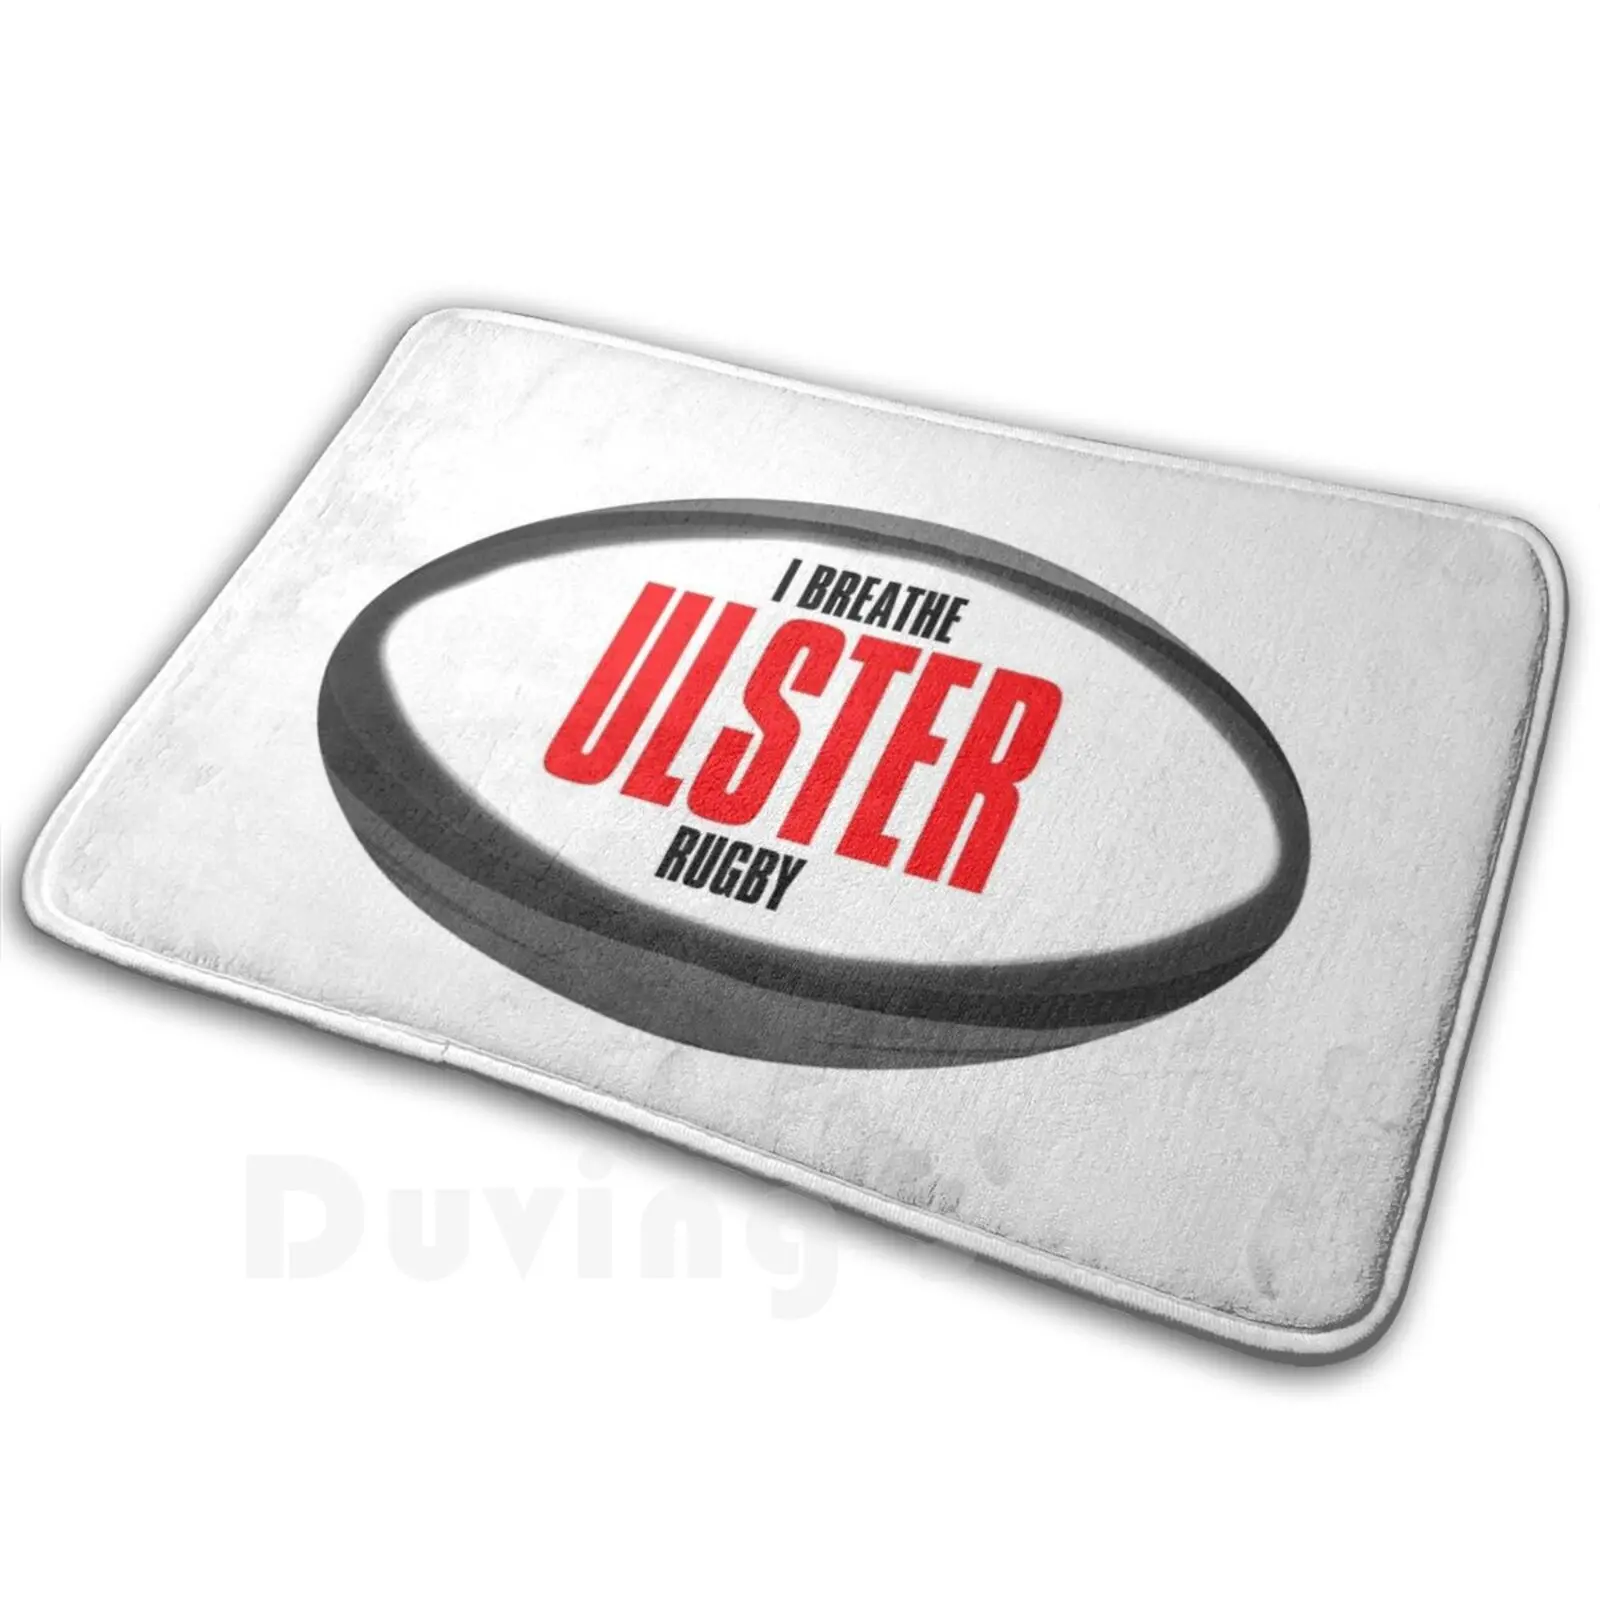 Ulster Rugby Logo rededuct